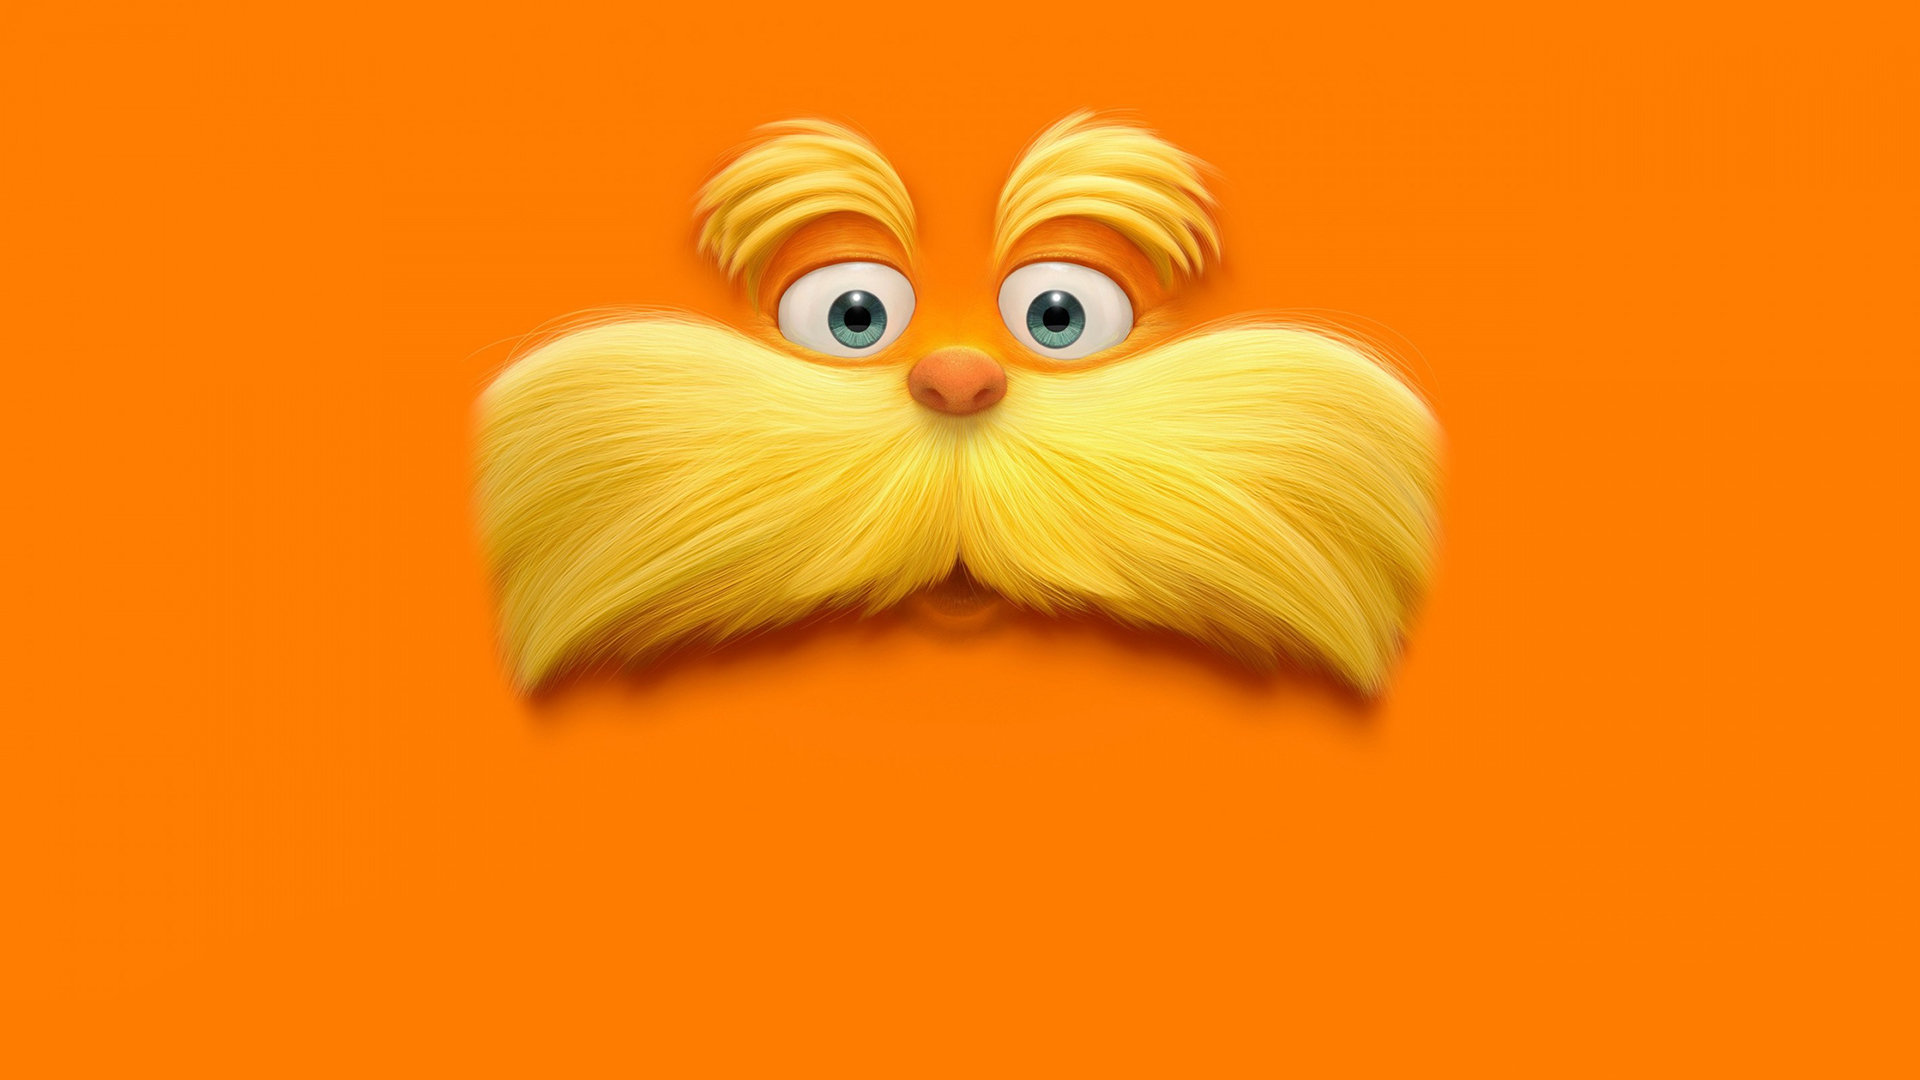 Download hd 1920x1080 The Lorax PC background ID:354136 for free